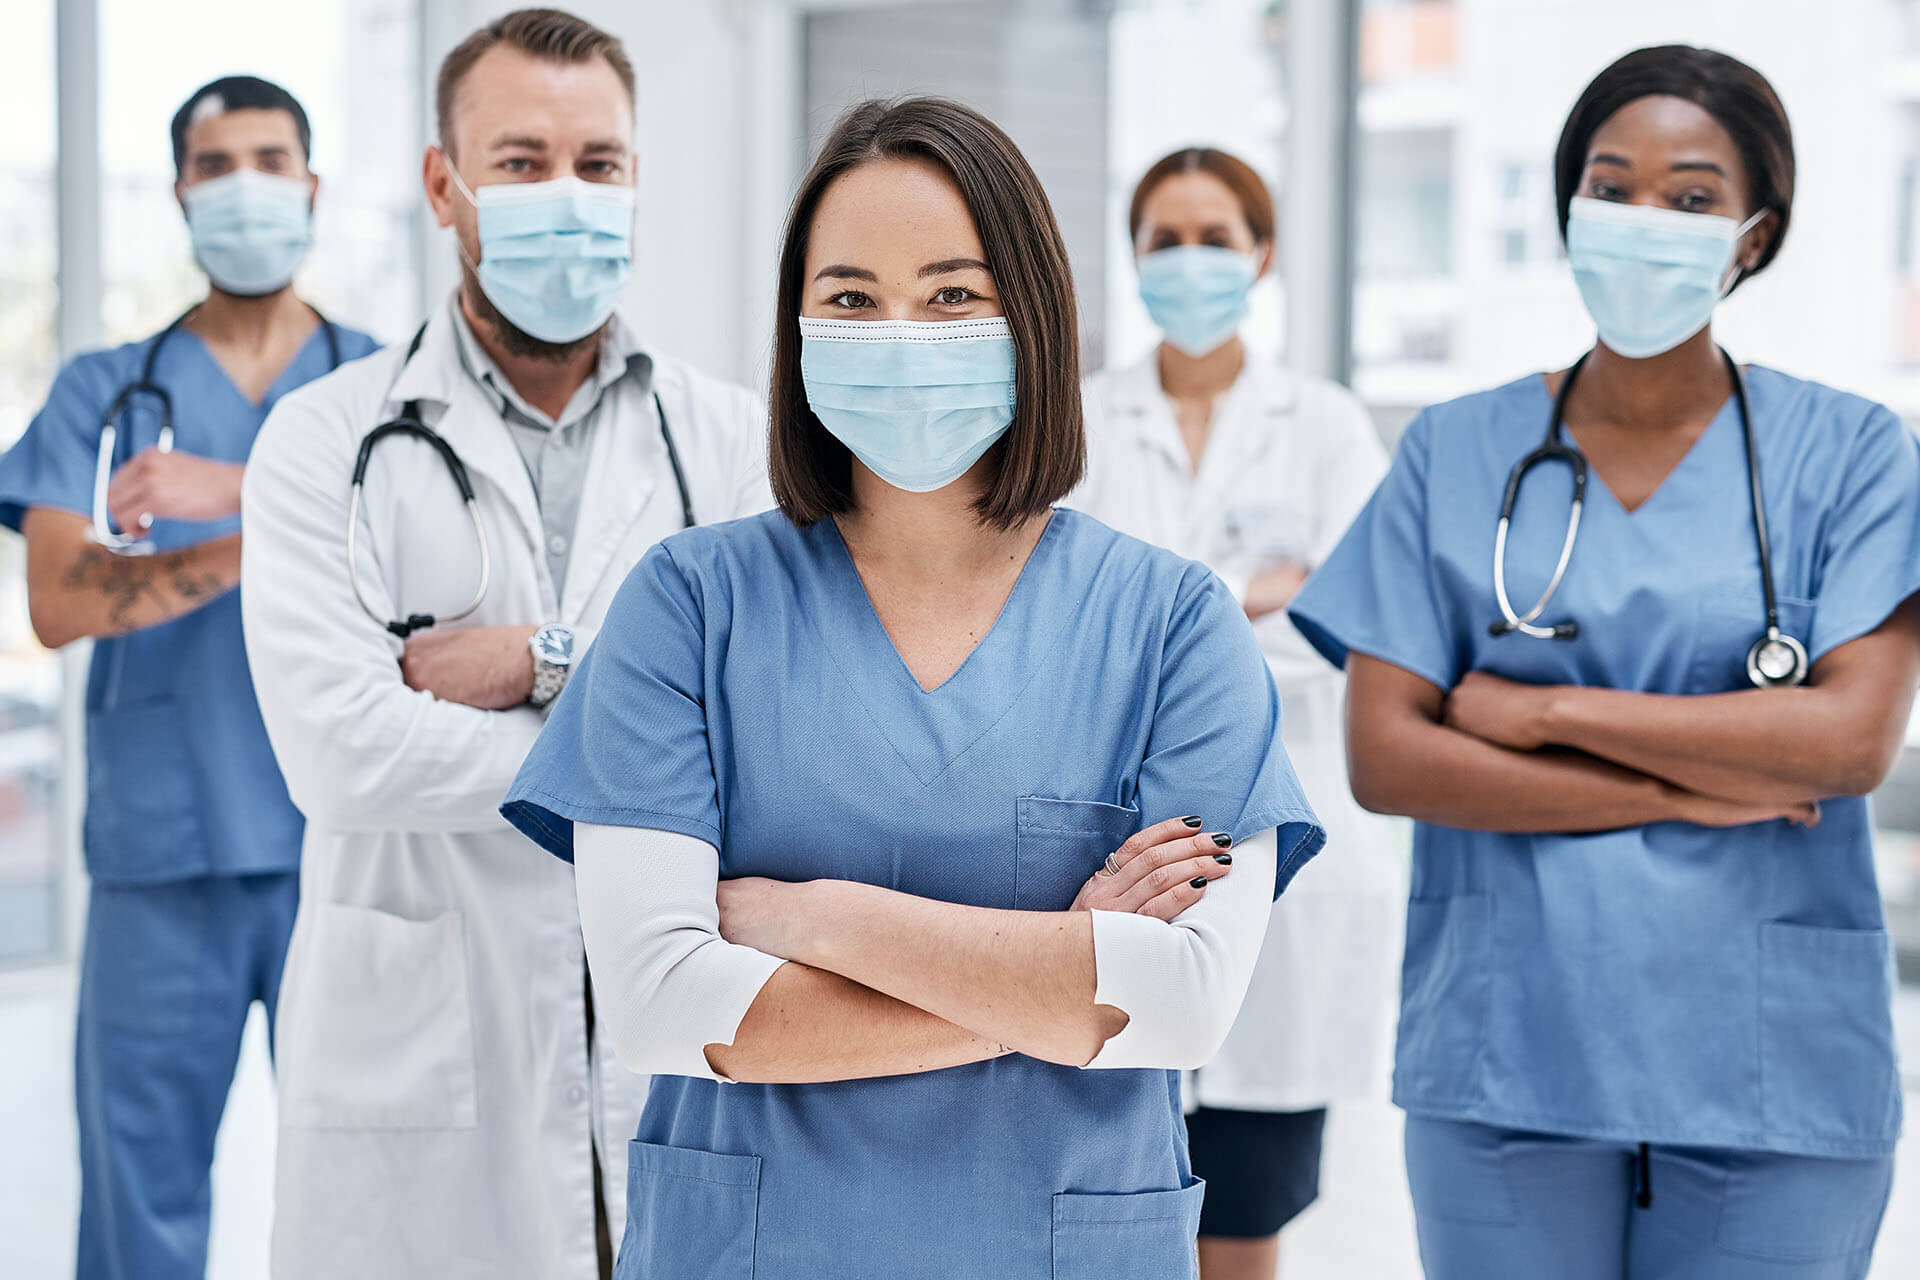 Group of racially diverse healthcare workers standing together wearing masks